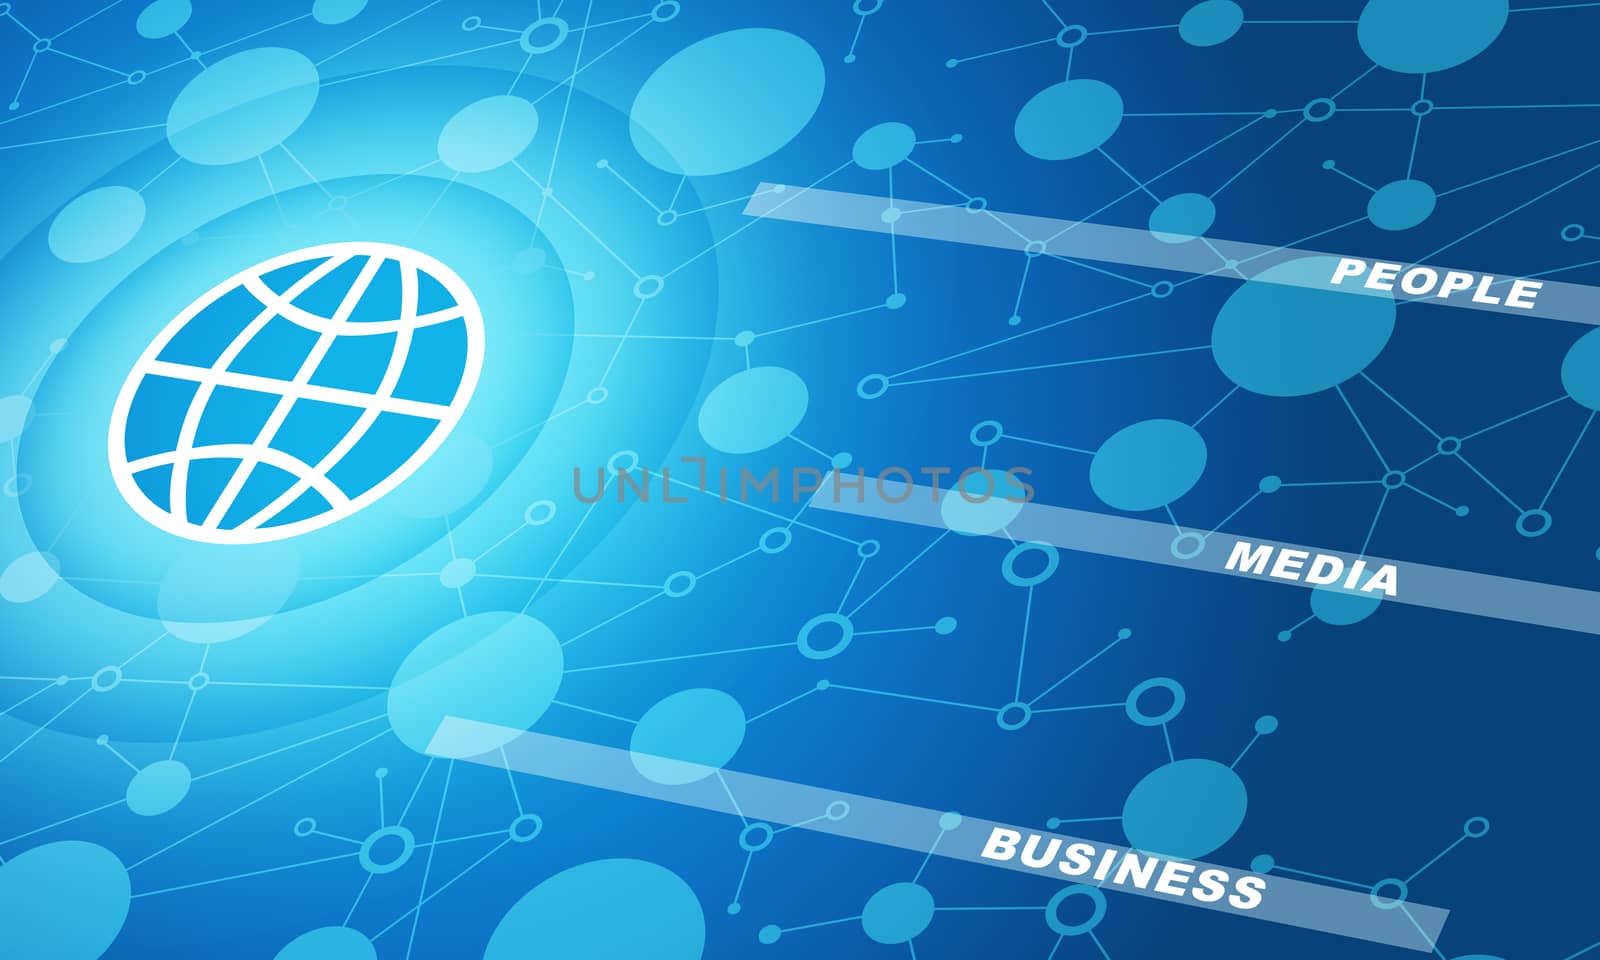 Globe symbol with business words on abstract blue background